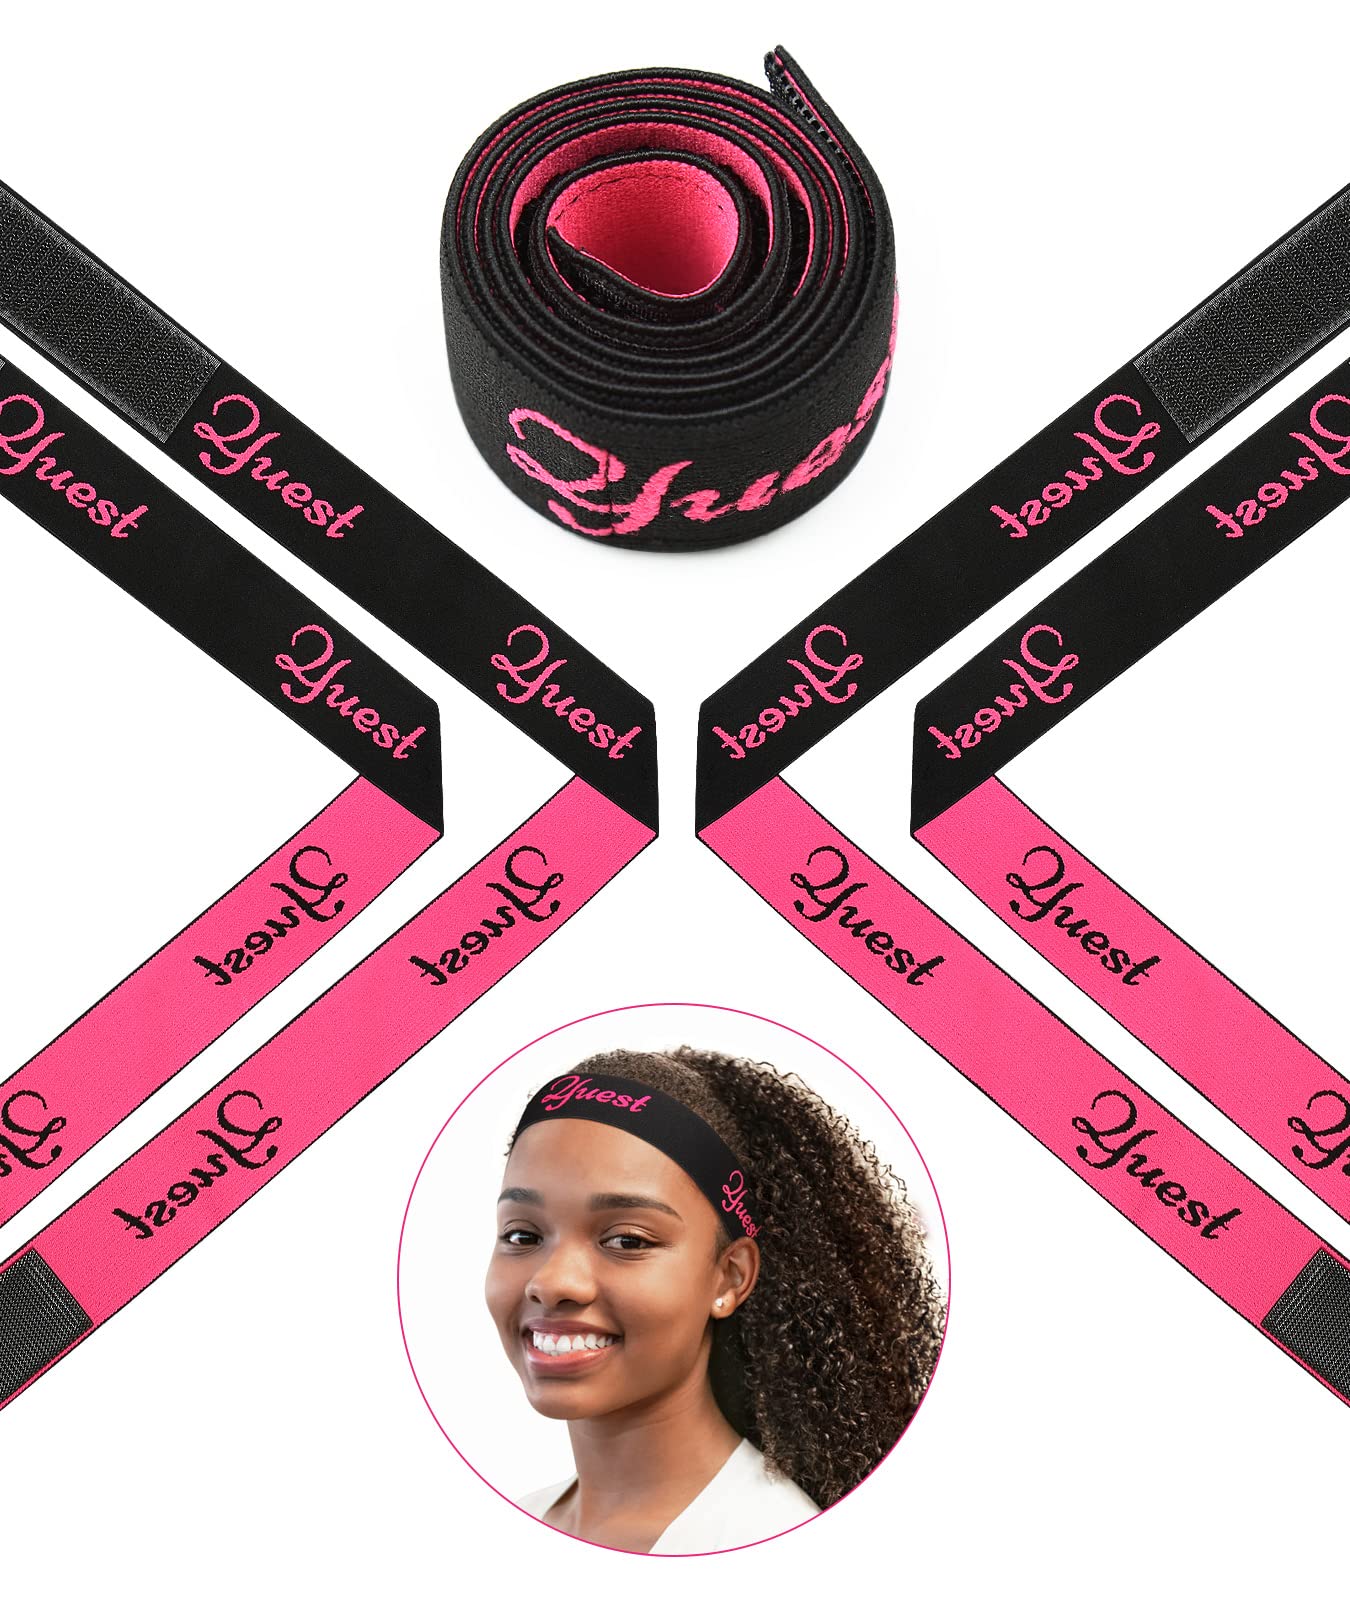 Edge Melt Band For Lace Wigs With Ear Protection 5Packs Sticker Elastic  Band With Logo For Laying Lace Edge Control Hair Band - AliExpress